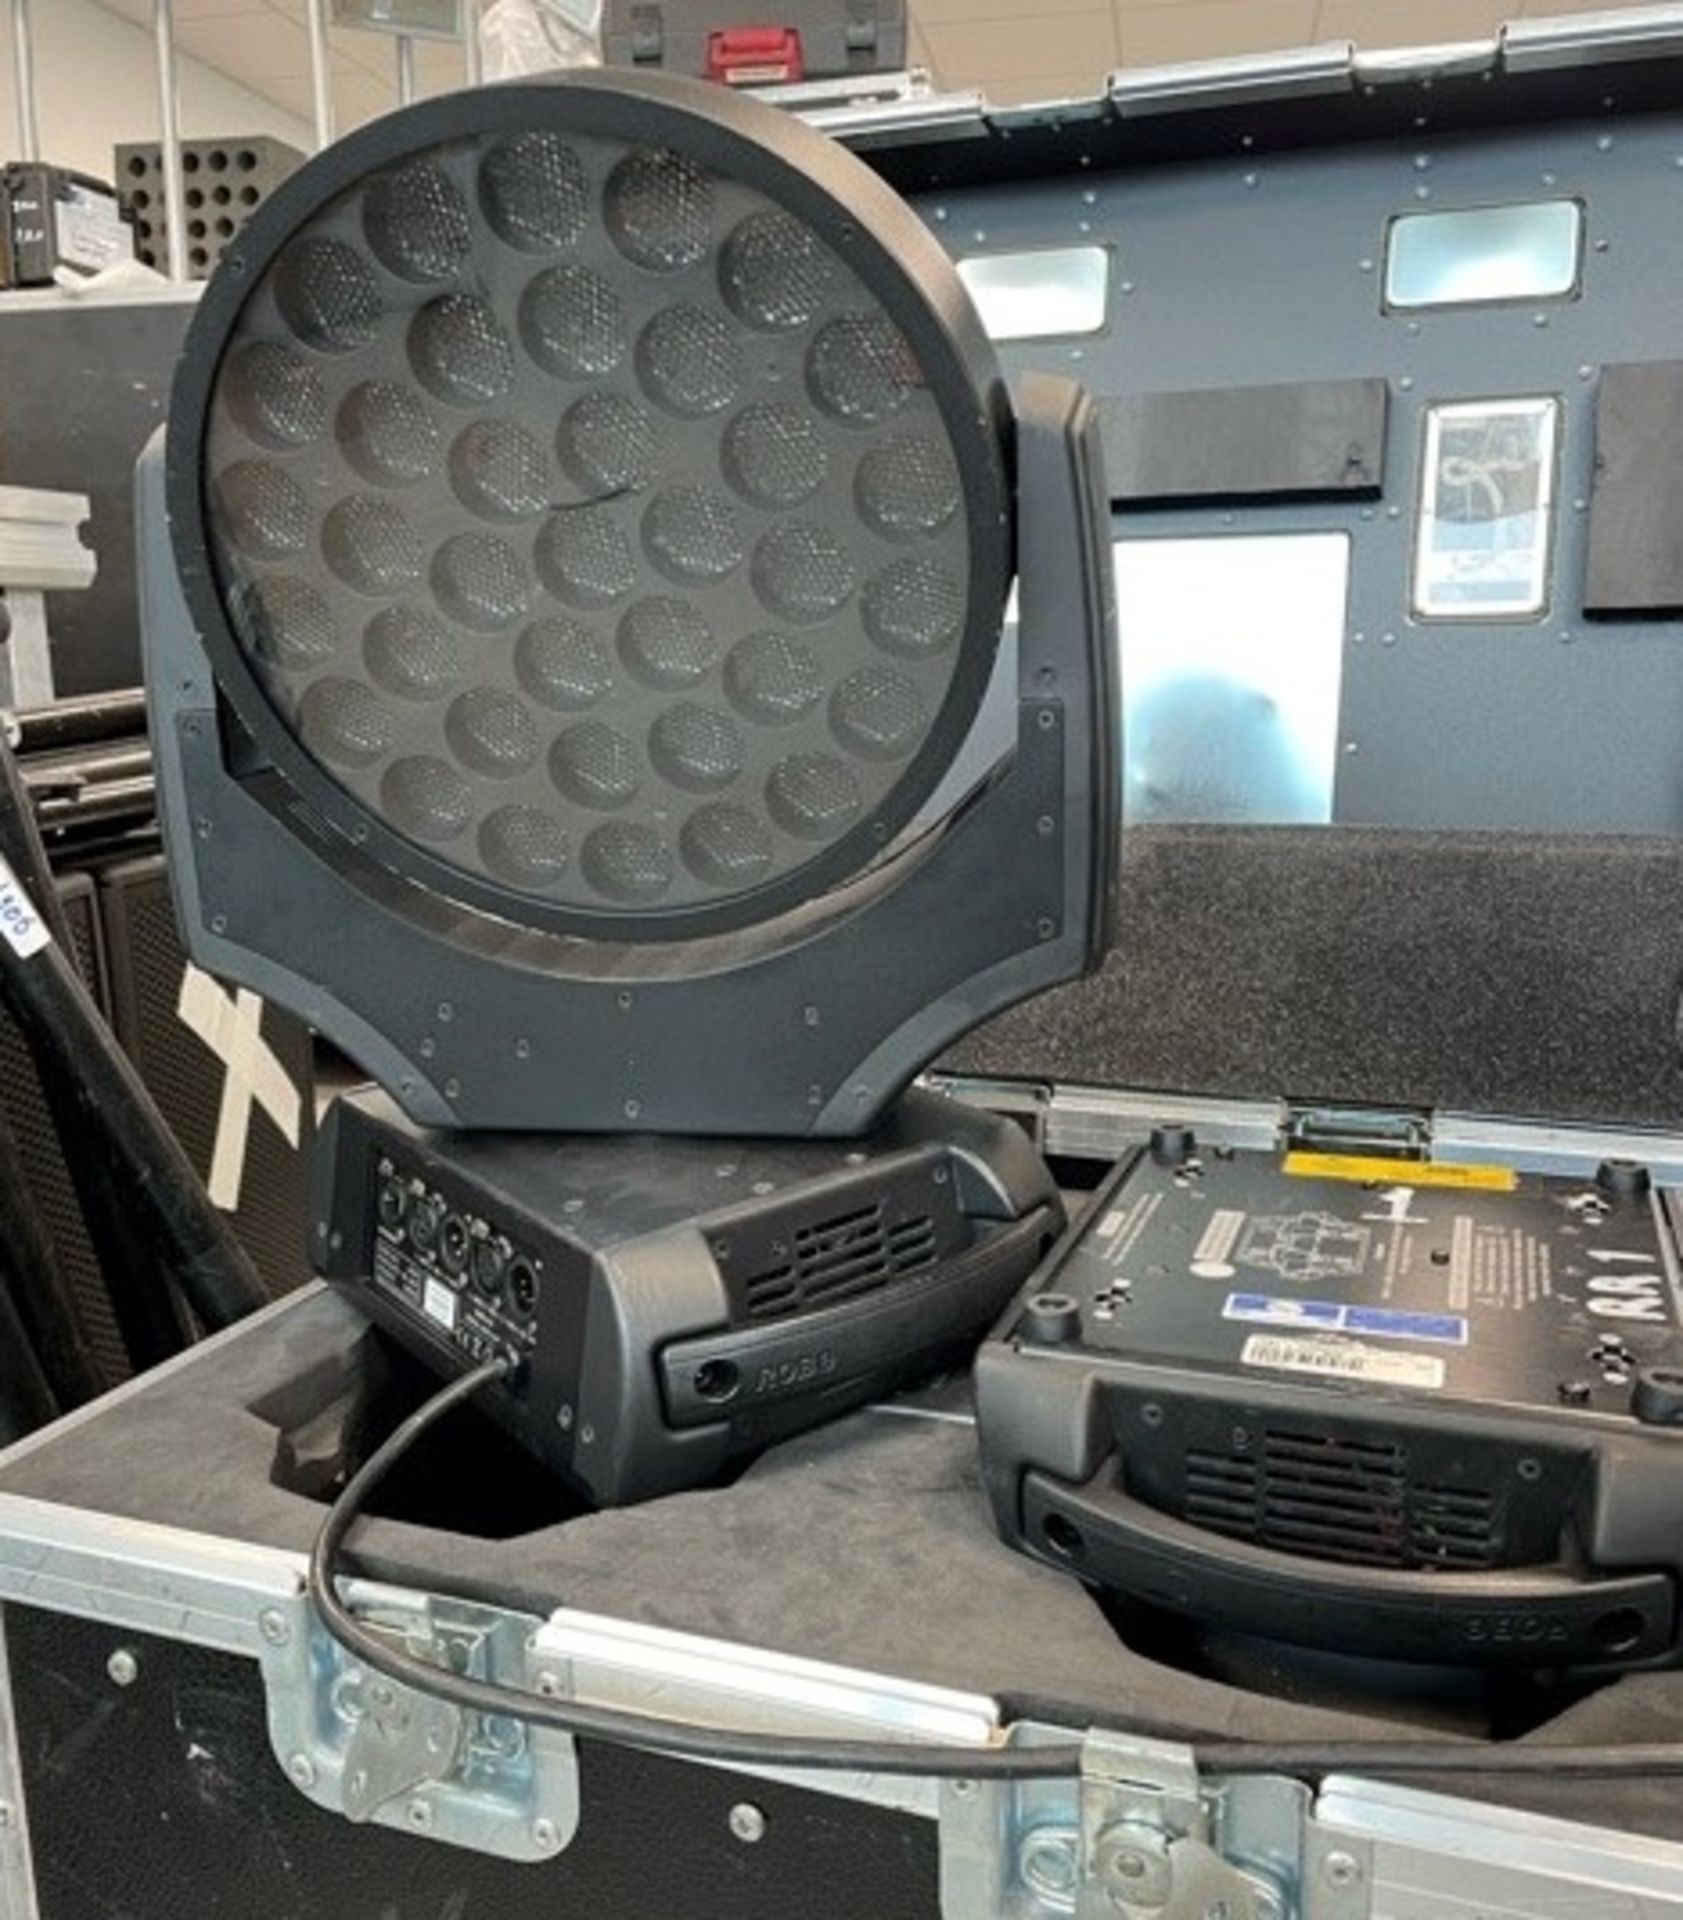 2 x Robe Robin 600 LED Moving Head/Wash In Flight Case - Ref: 881 - CL581 - Location: Altrincham - Image 2 of 3